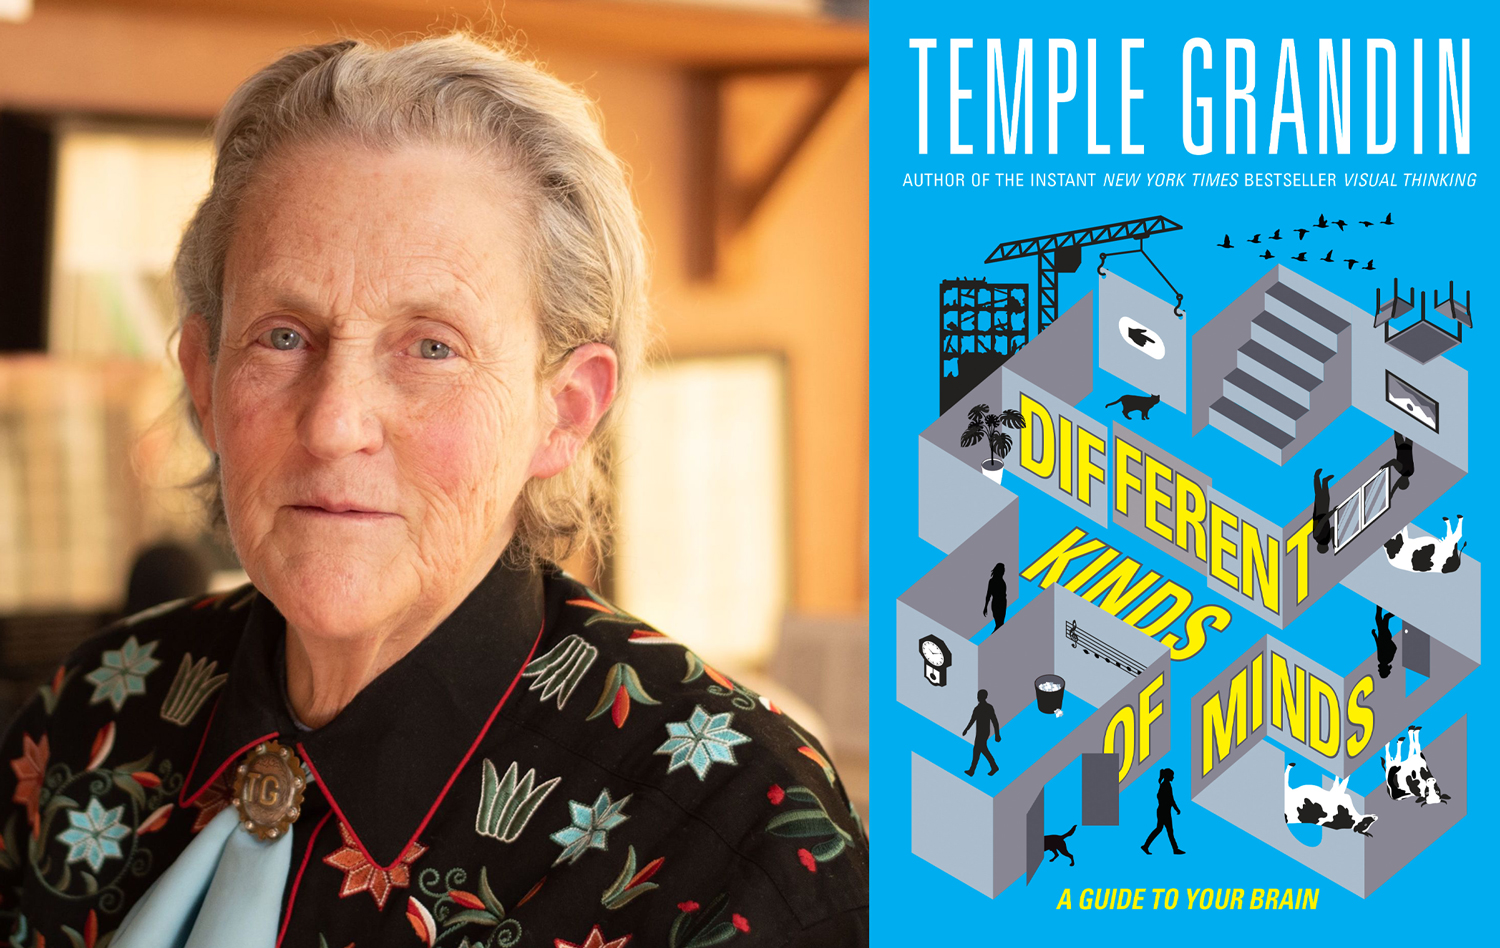 A headshot of Temple Grandin is placed next to the cover of the book Different Kinds of Minds.